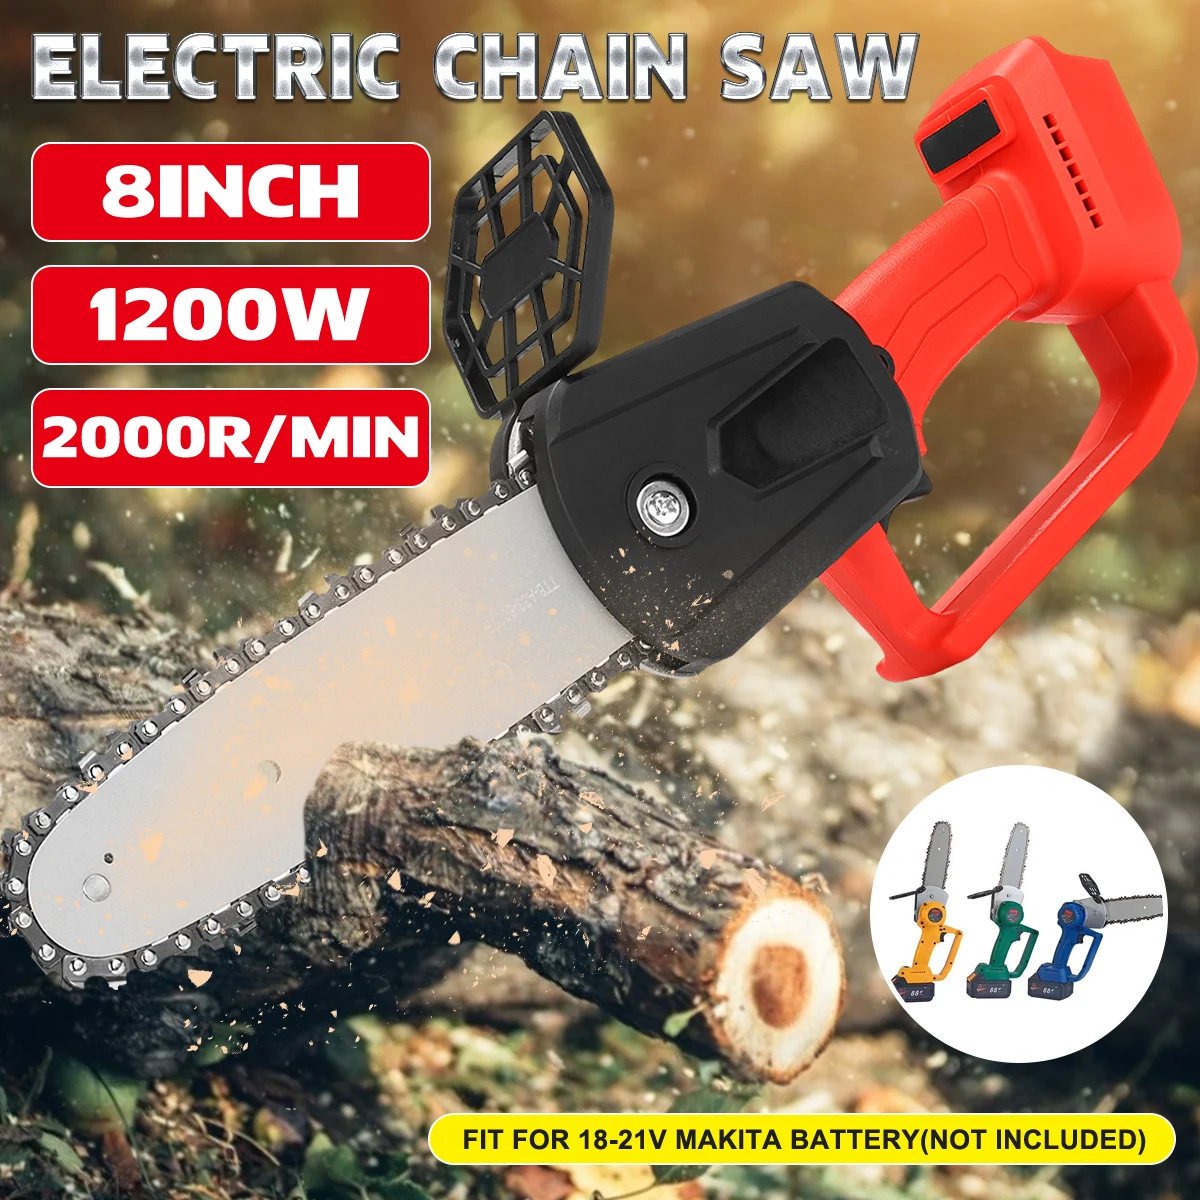 

For 18V-21V Makita Battery 1200W 8 Inch Cordless Electric Chain Saw Brushless Motor Chainsaw Garden Woodwork Power Blade